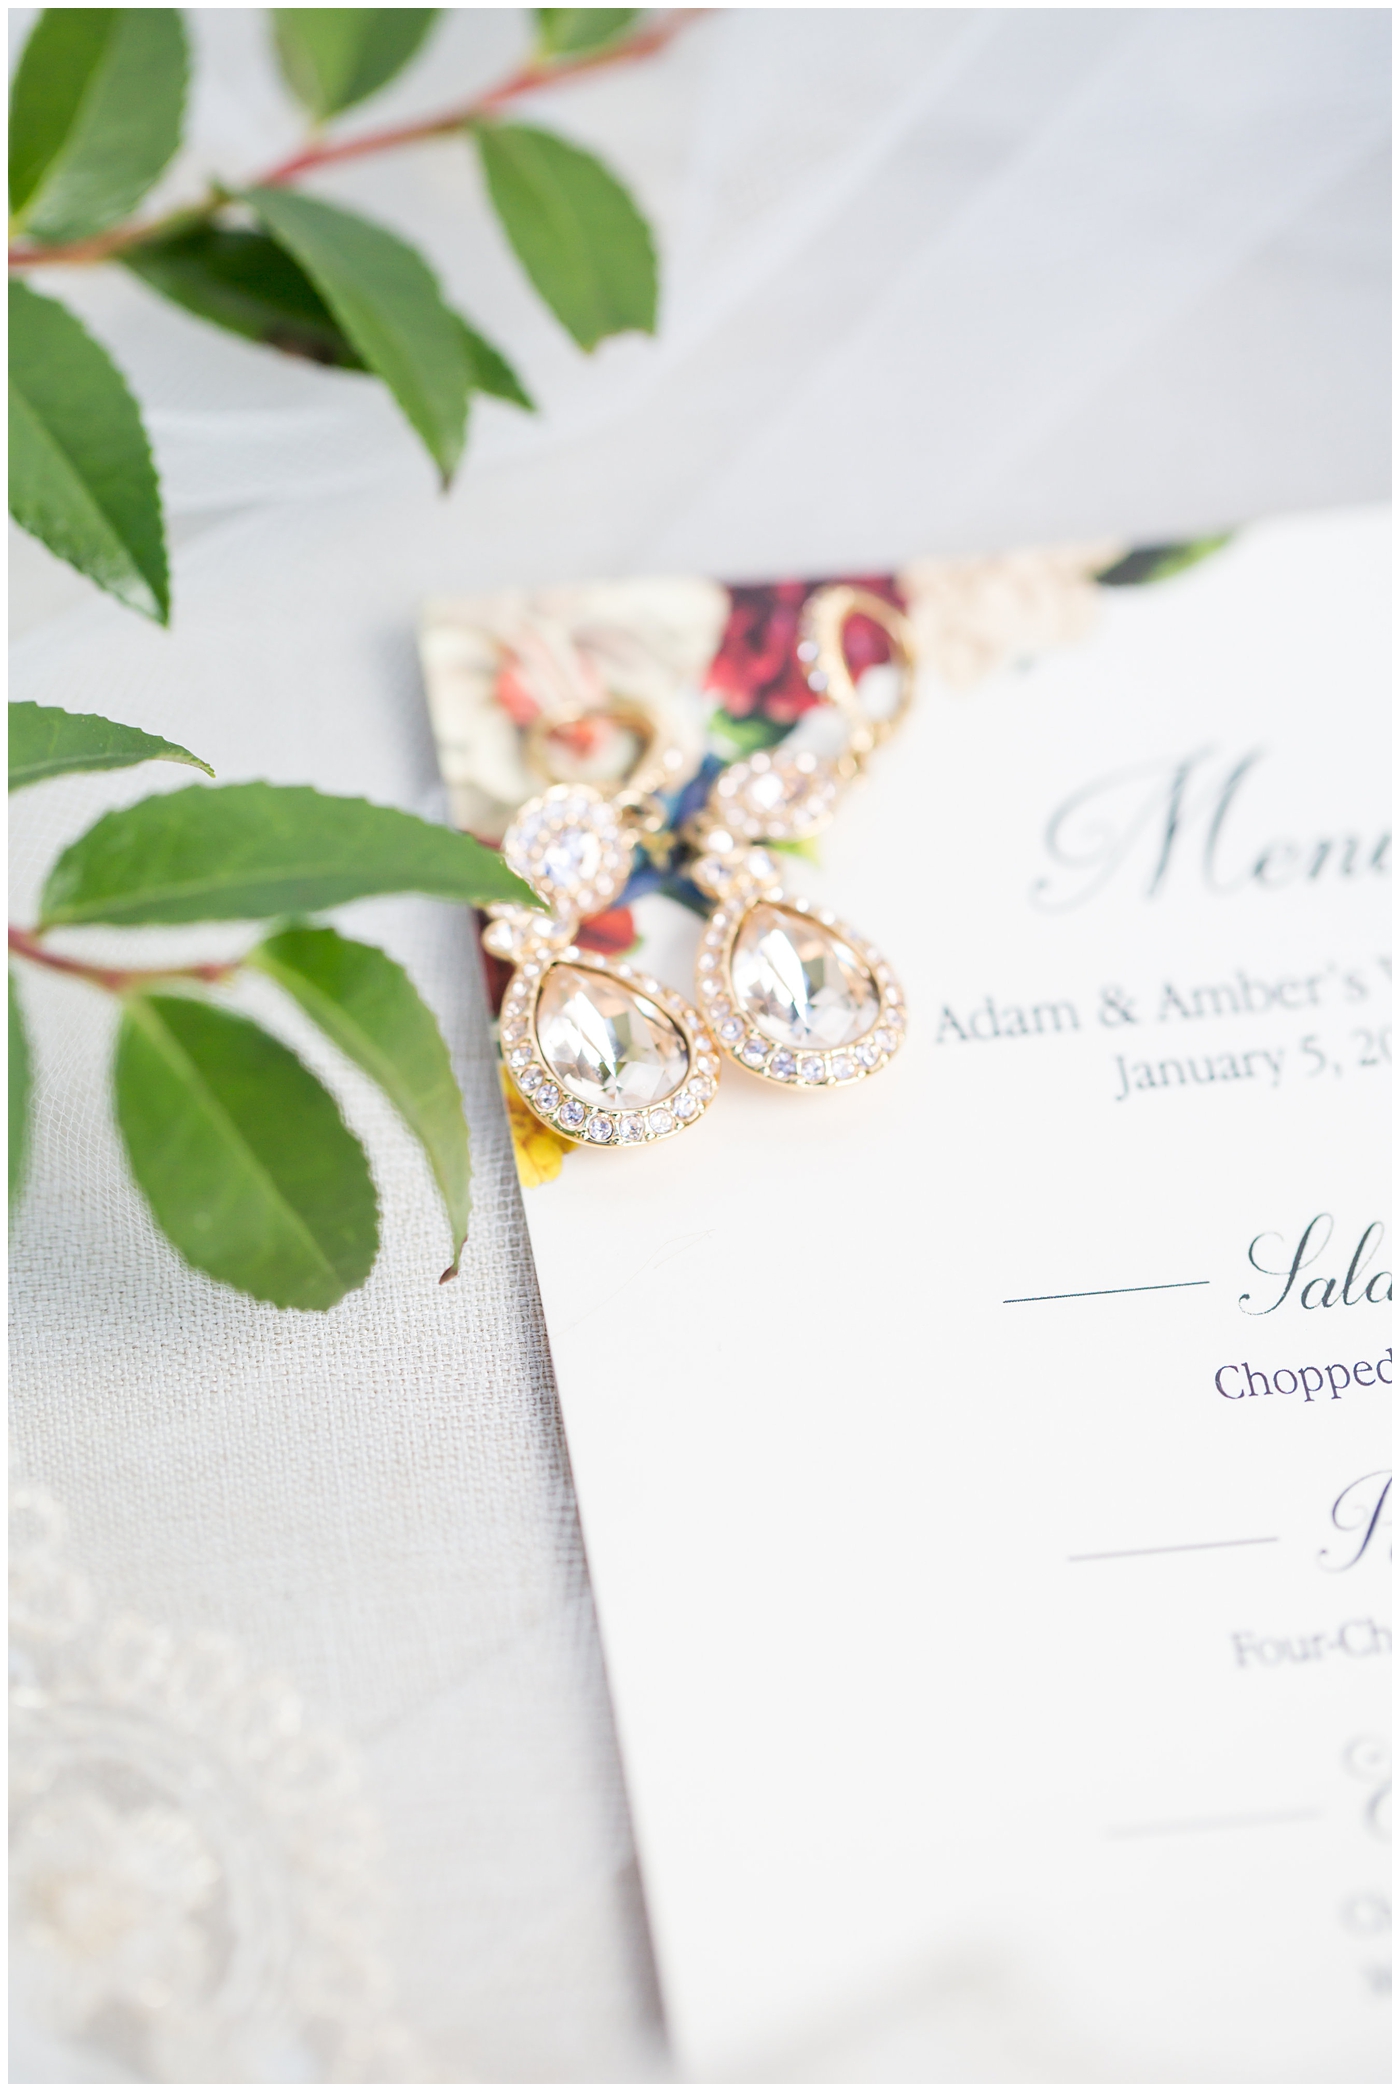 wedding invite with burgundy florals with rose gold wedding rings and bands wedding day details